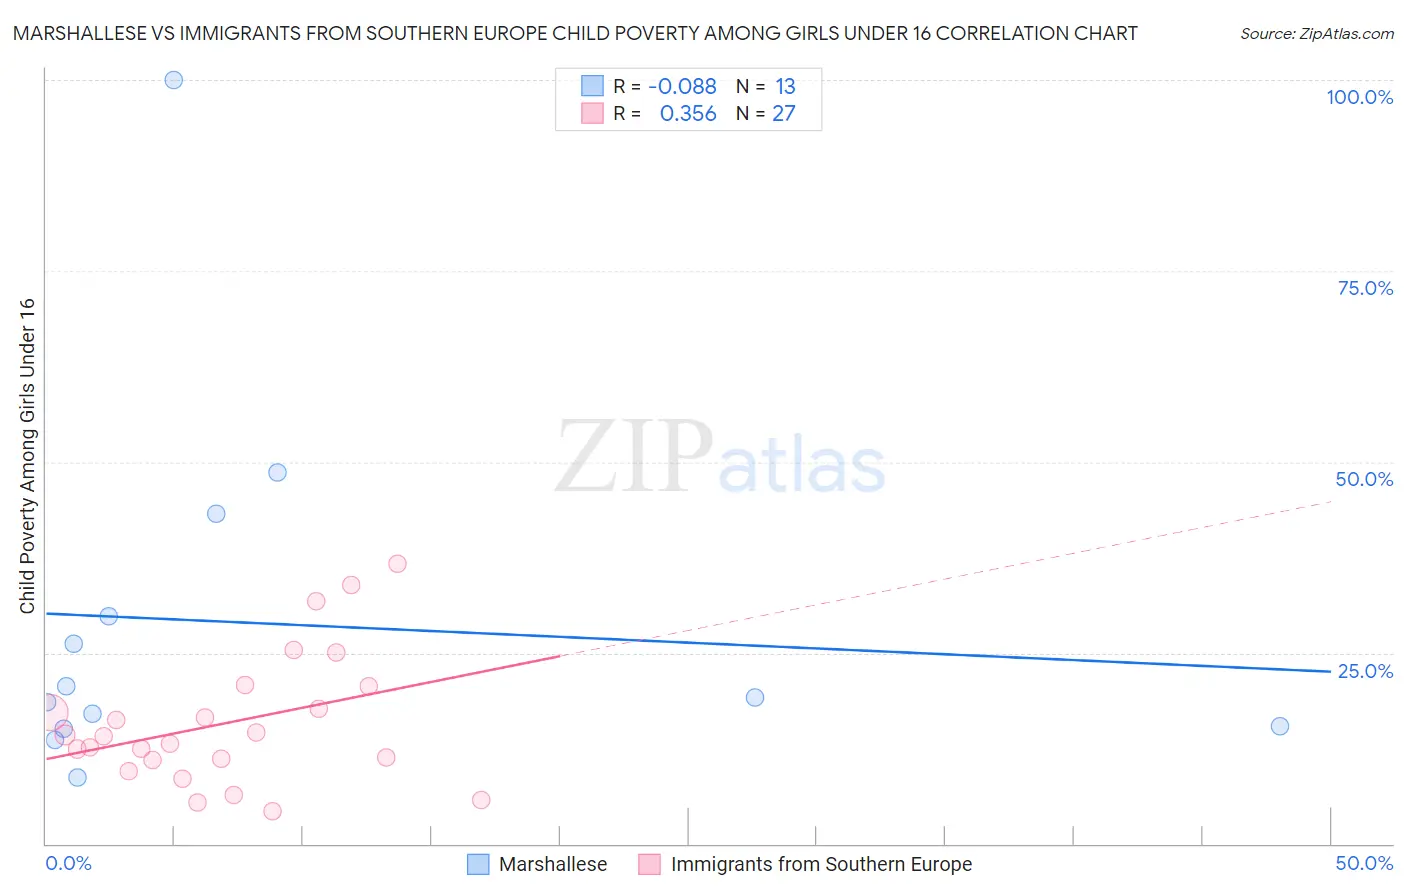 Marshallese vs Immigrants from Southern Europe Child Poverty Among Girls Under 16